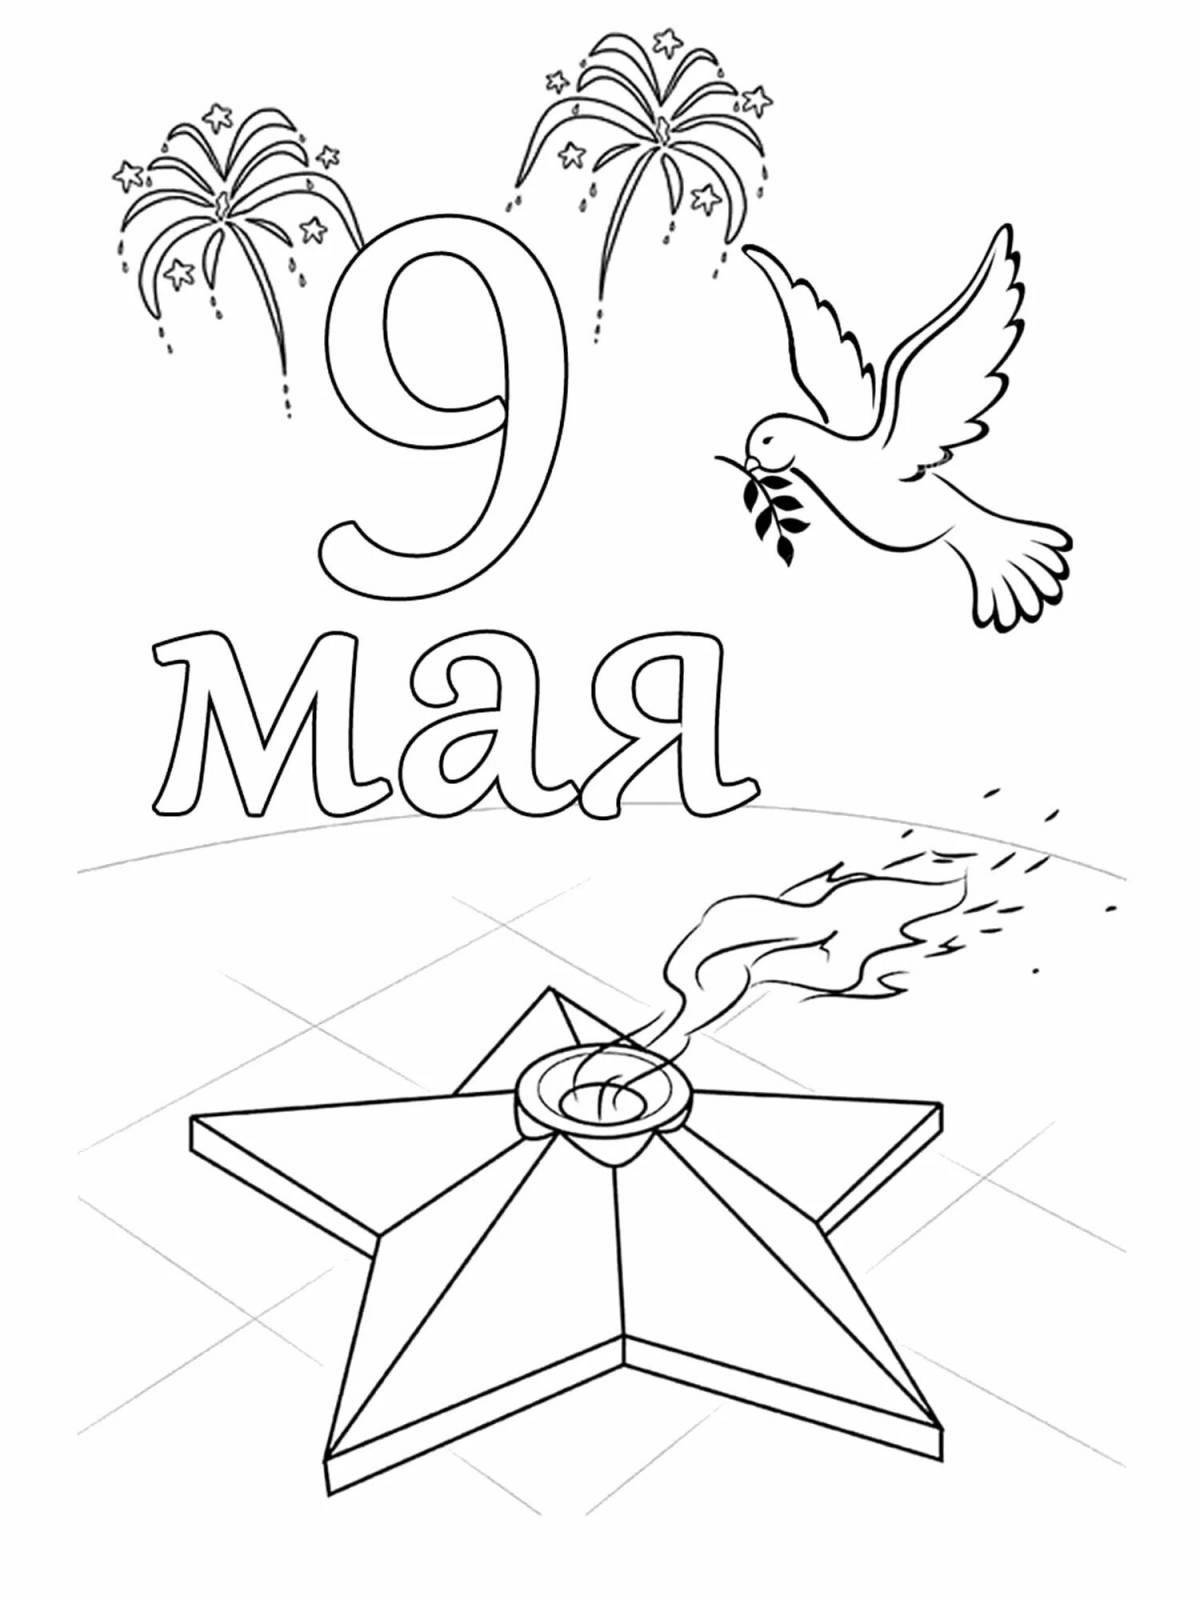 Color-frenzy 9 may coloring page